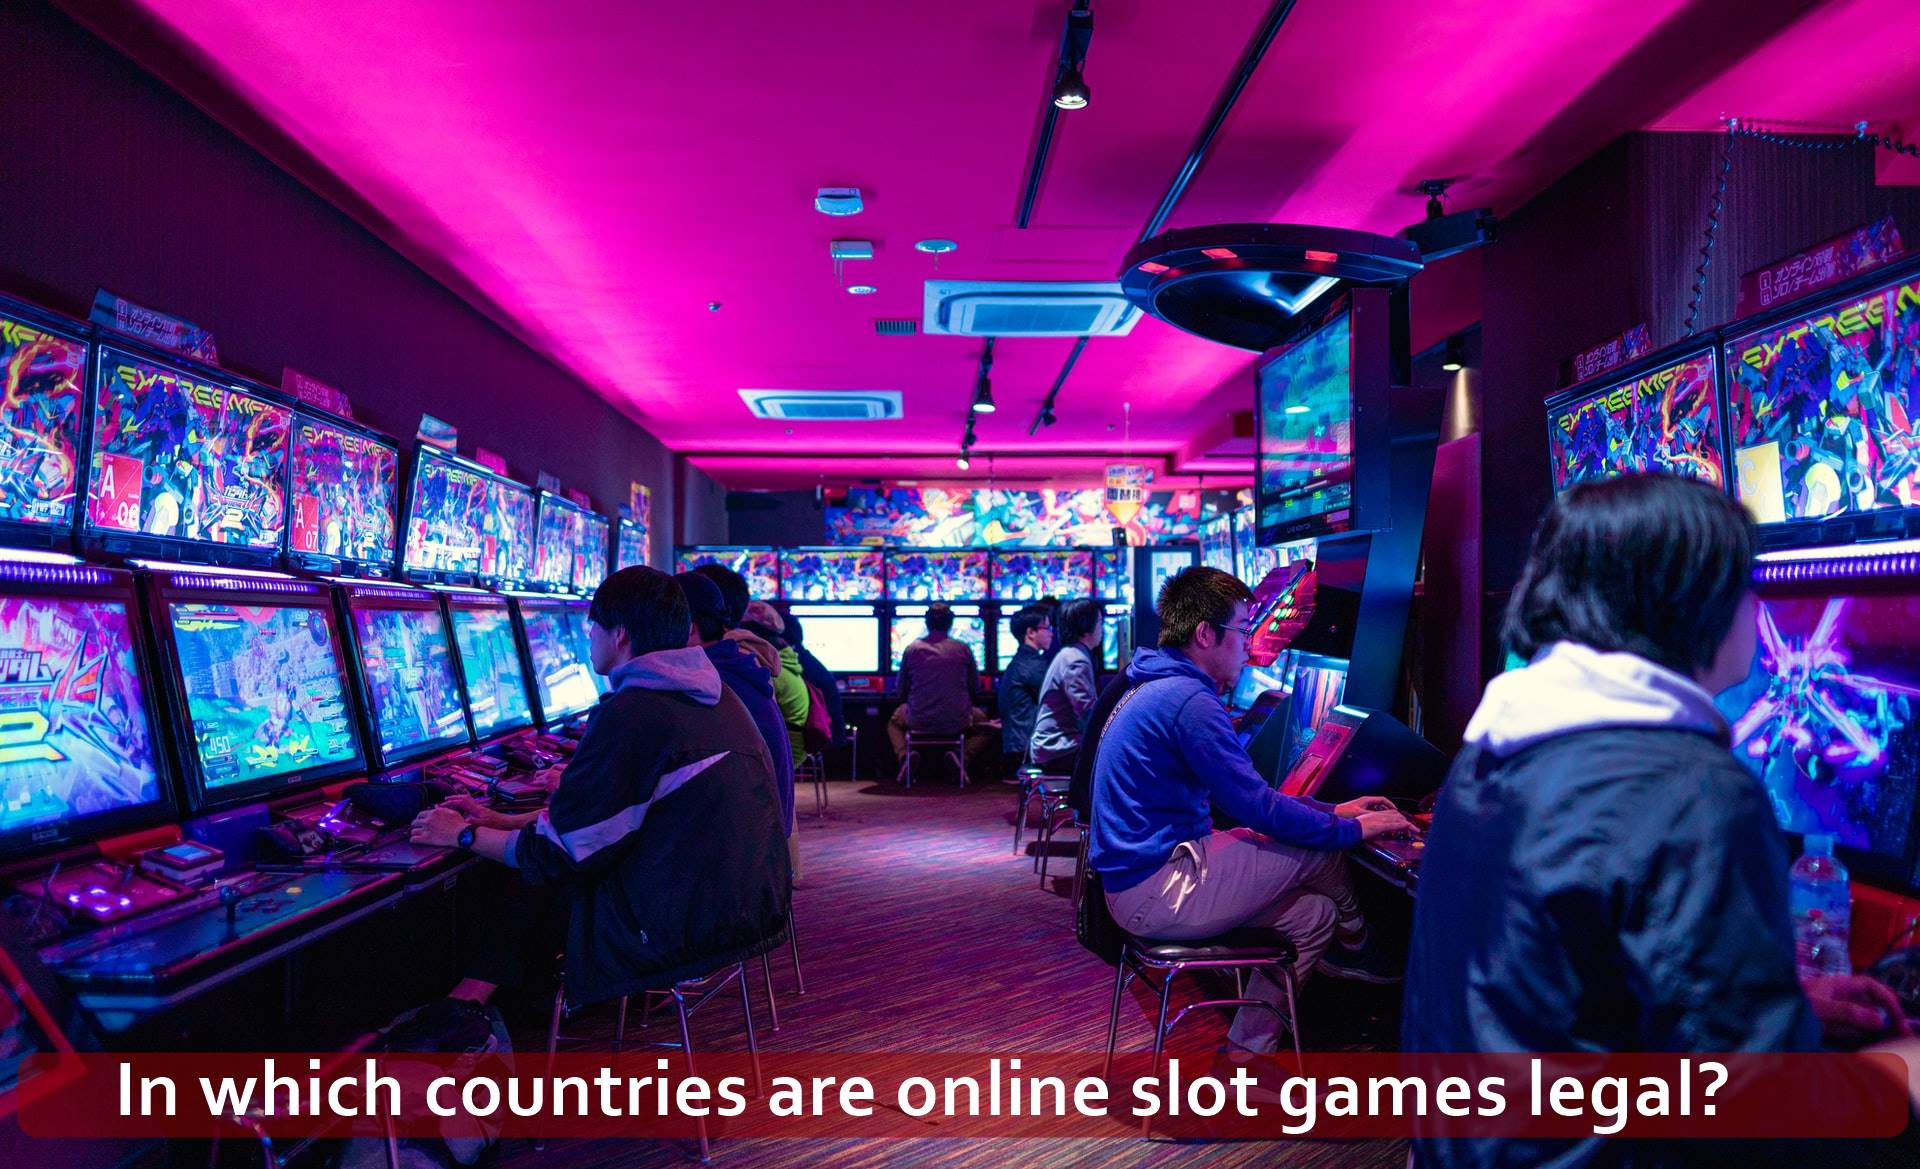 In which countries are online slot games legal?